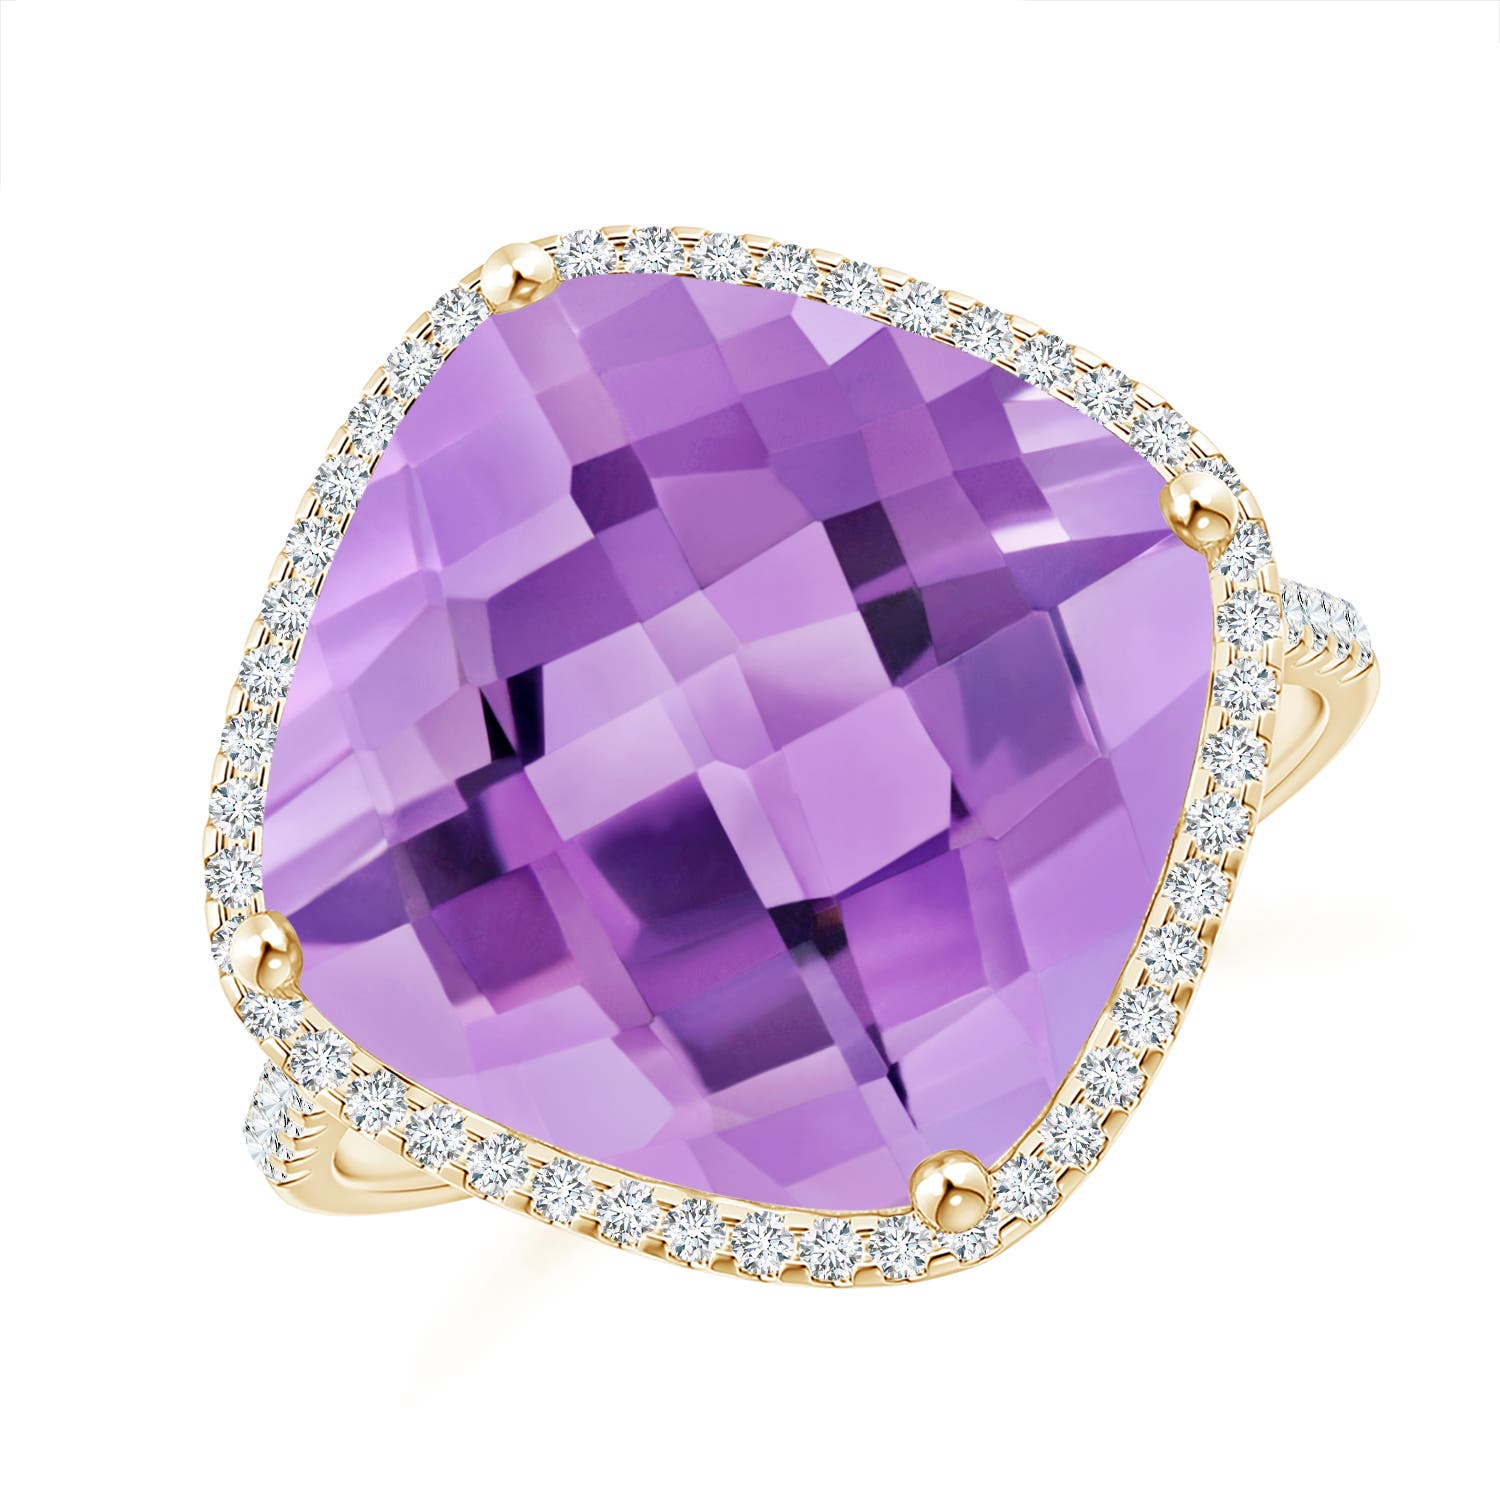 A - Amethyst / 8.32 CT / 14 KT Yellow Gold